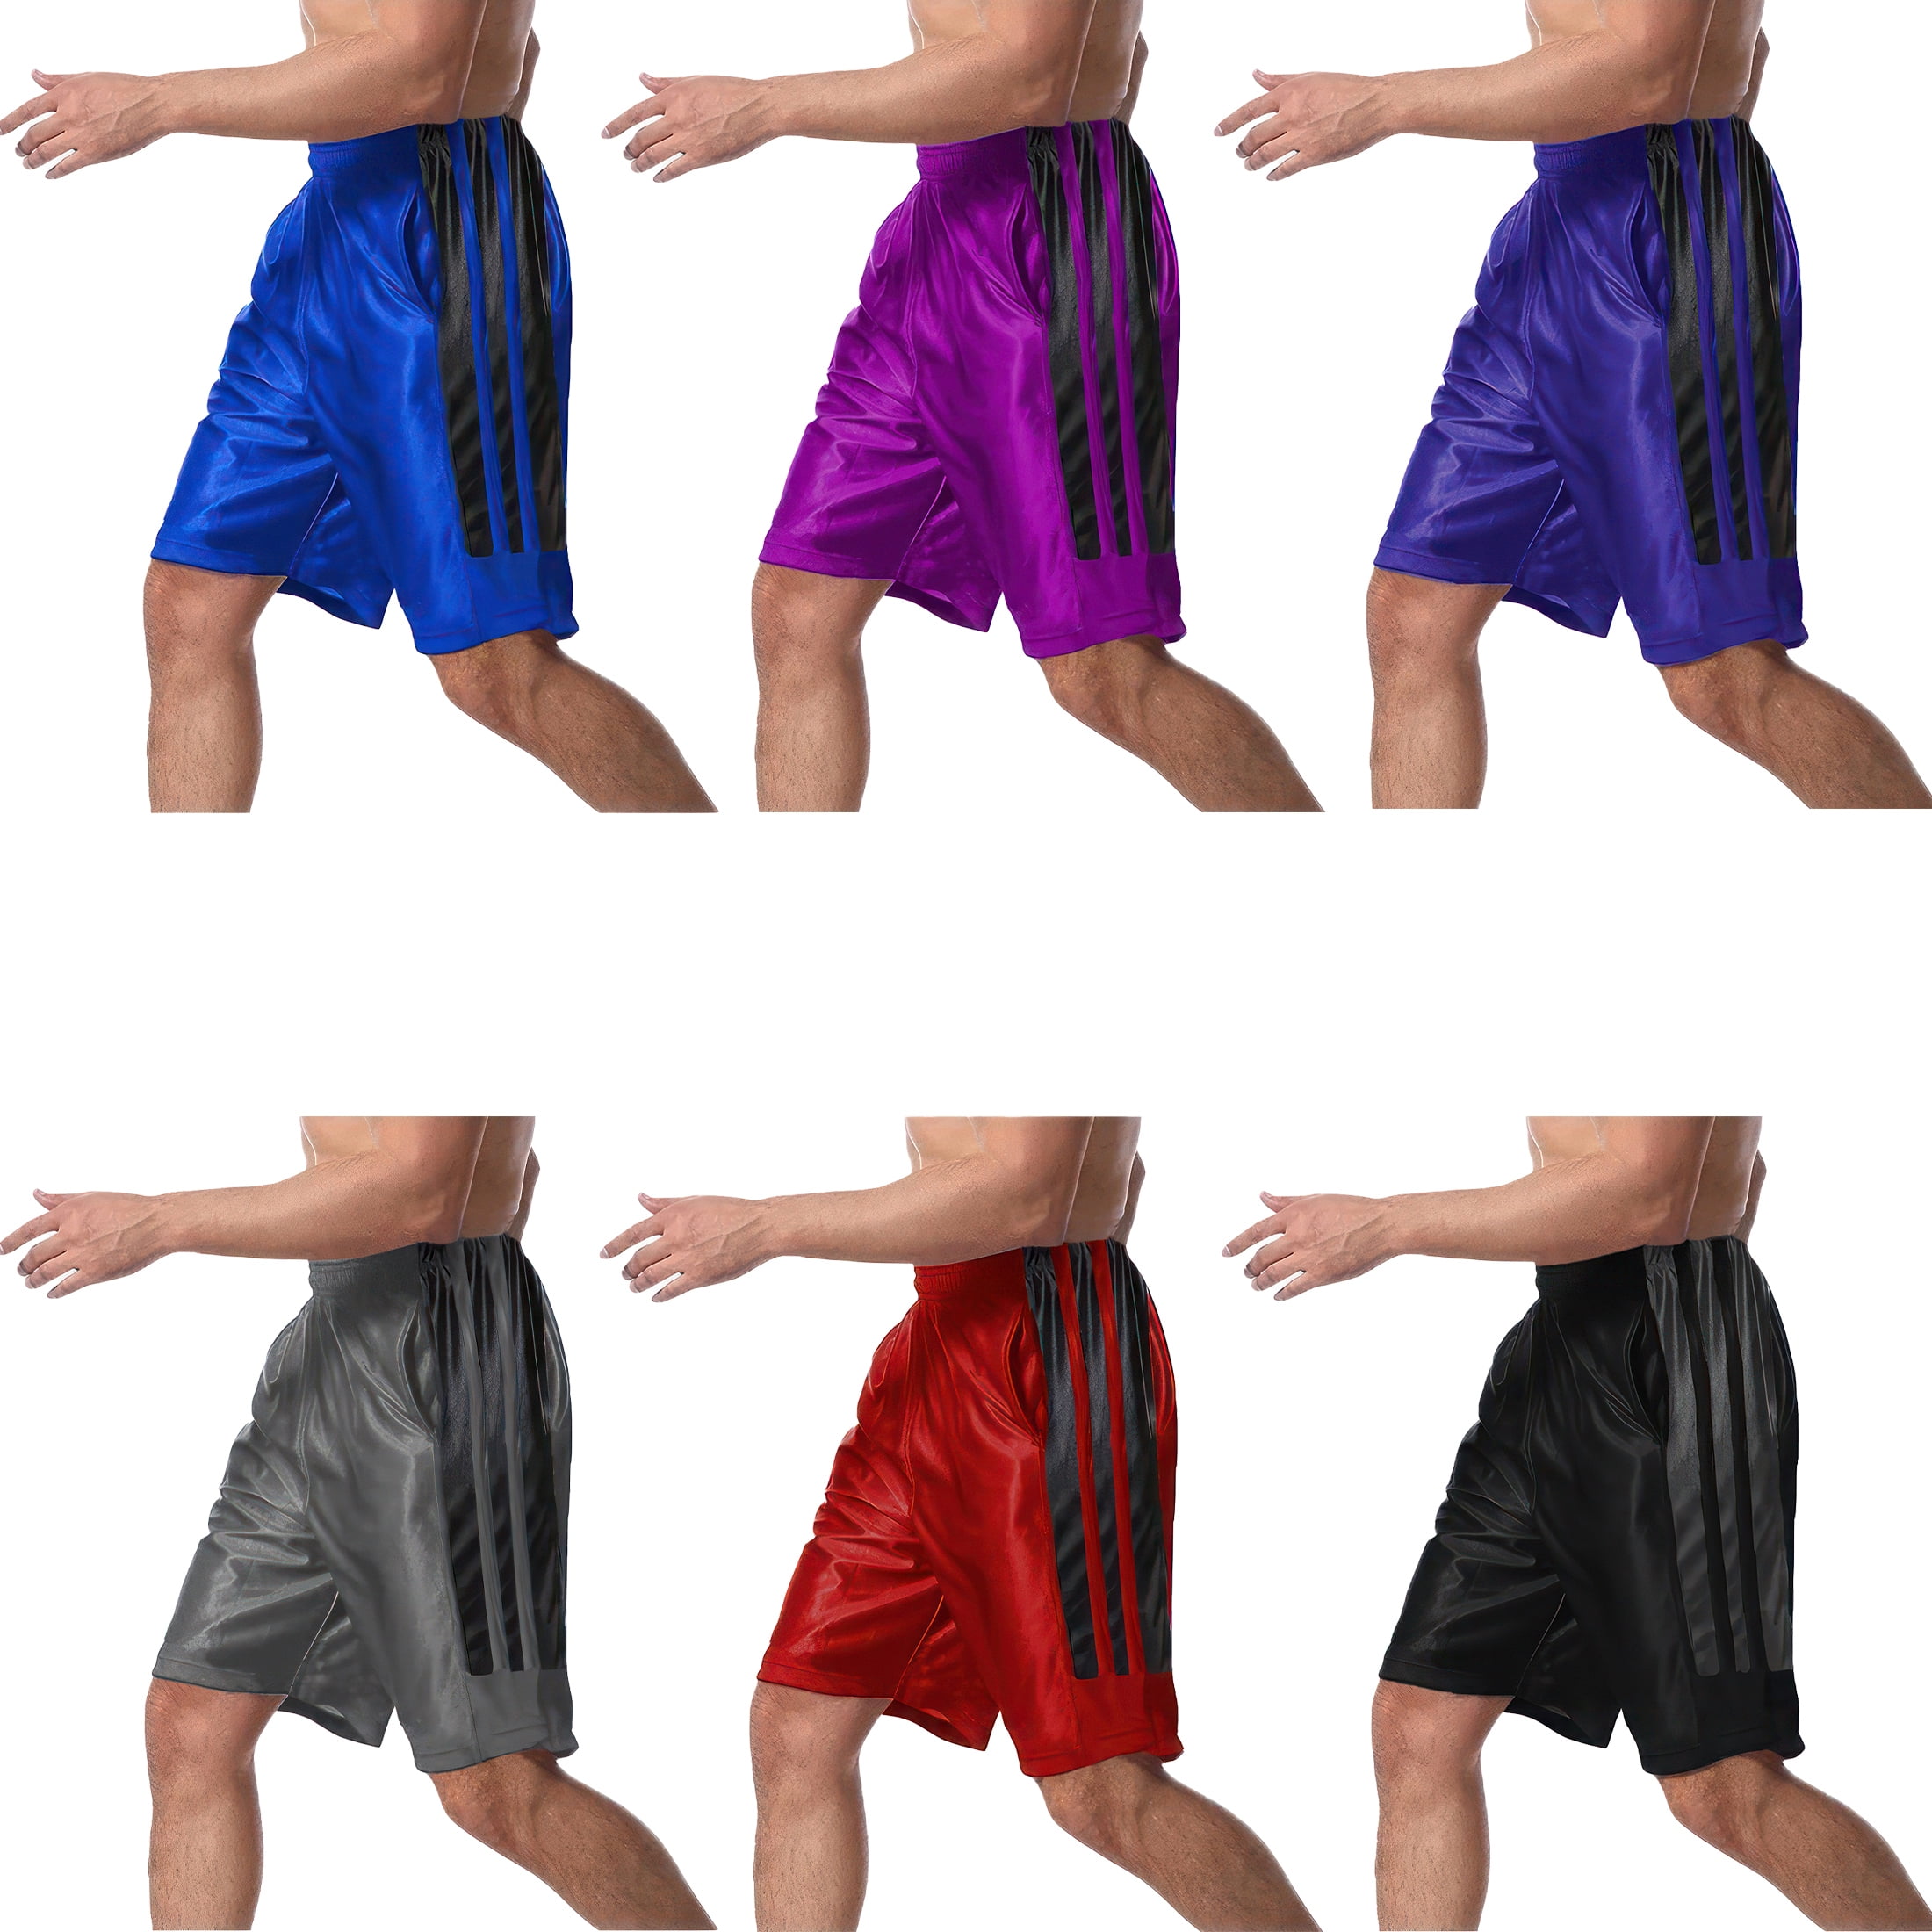 3-Pack Men's Dazzle Basketball Shorts Striped Athletic Quick-Dry